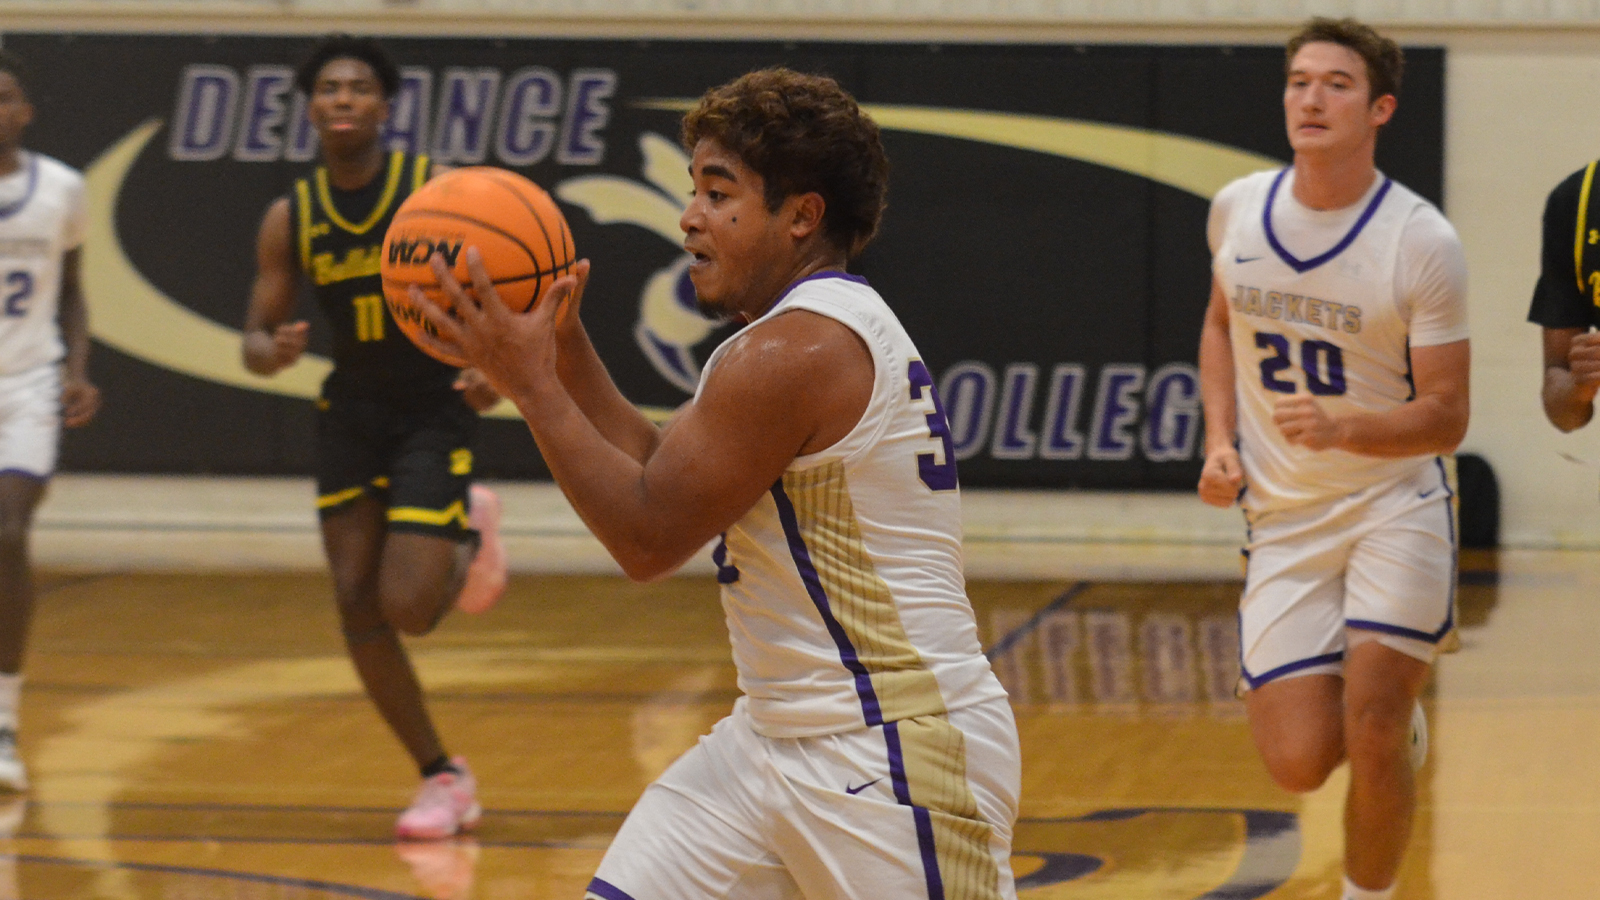 Yellow Jackets lose conference opener at Manchester